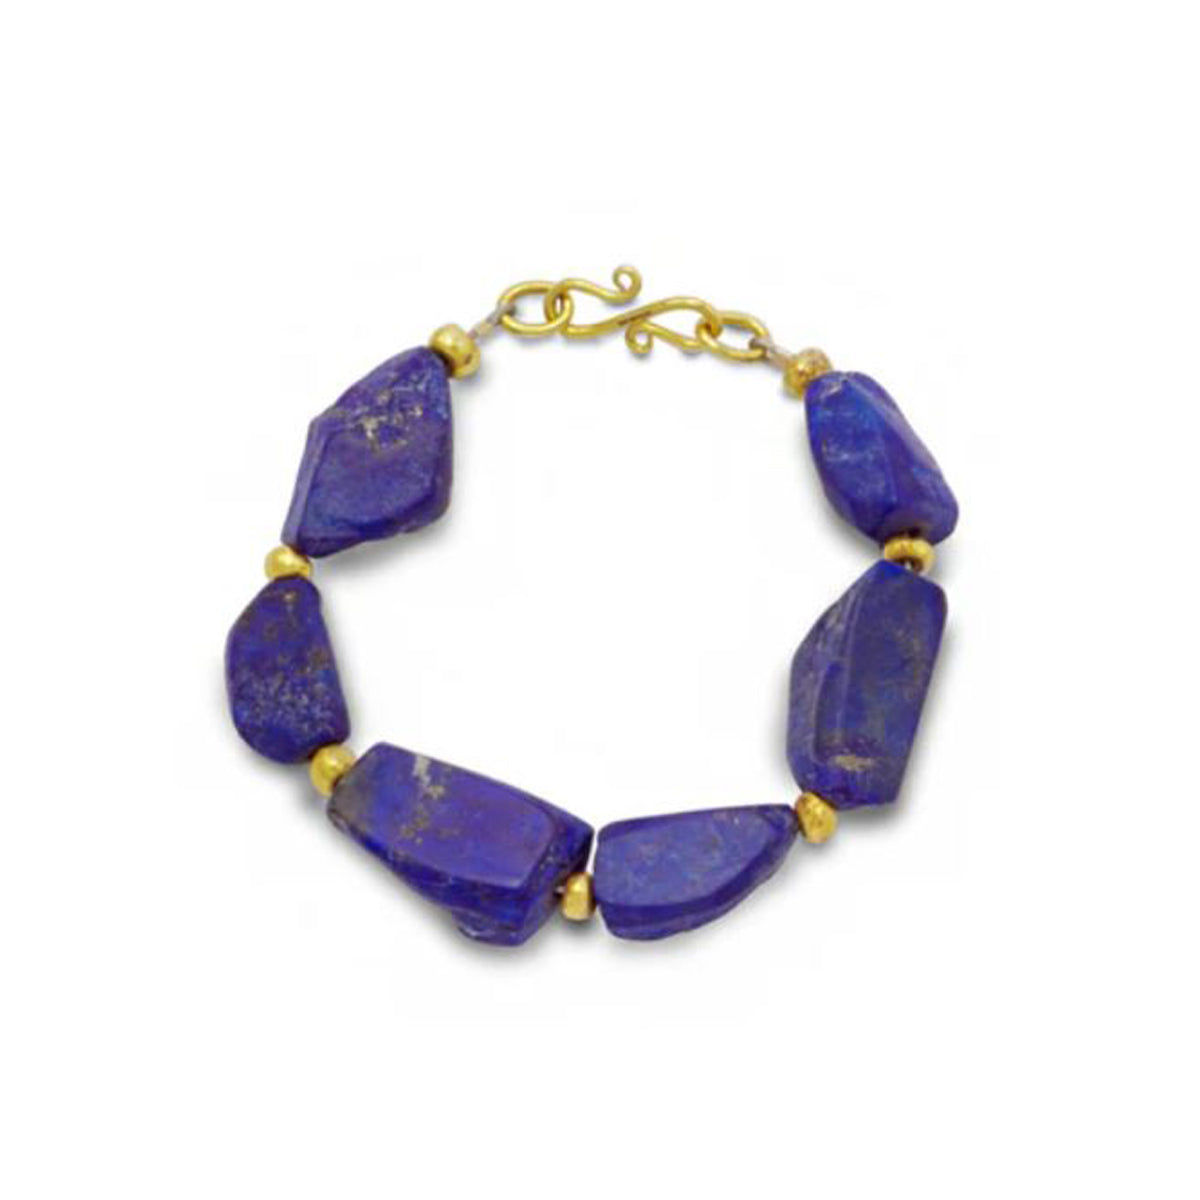 Lapis Lazuli and Solid 9ct Gold Nugget Bracelet